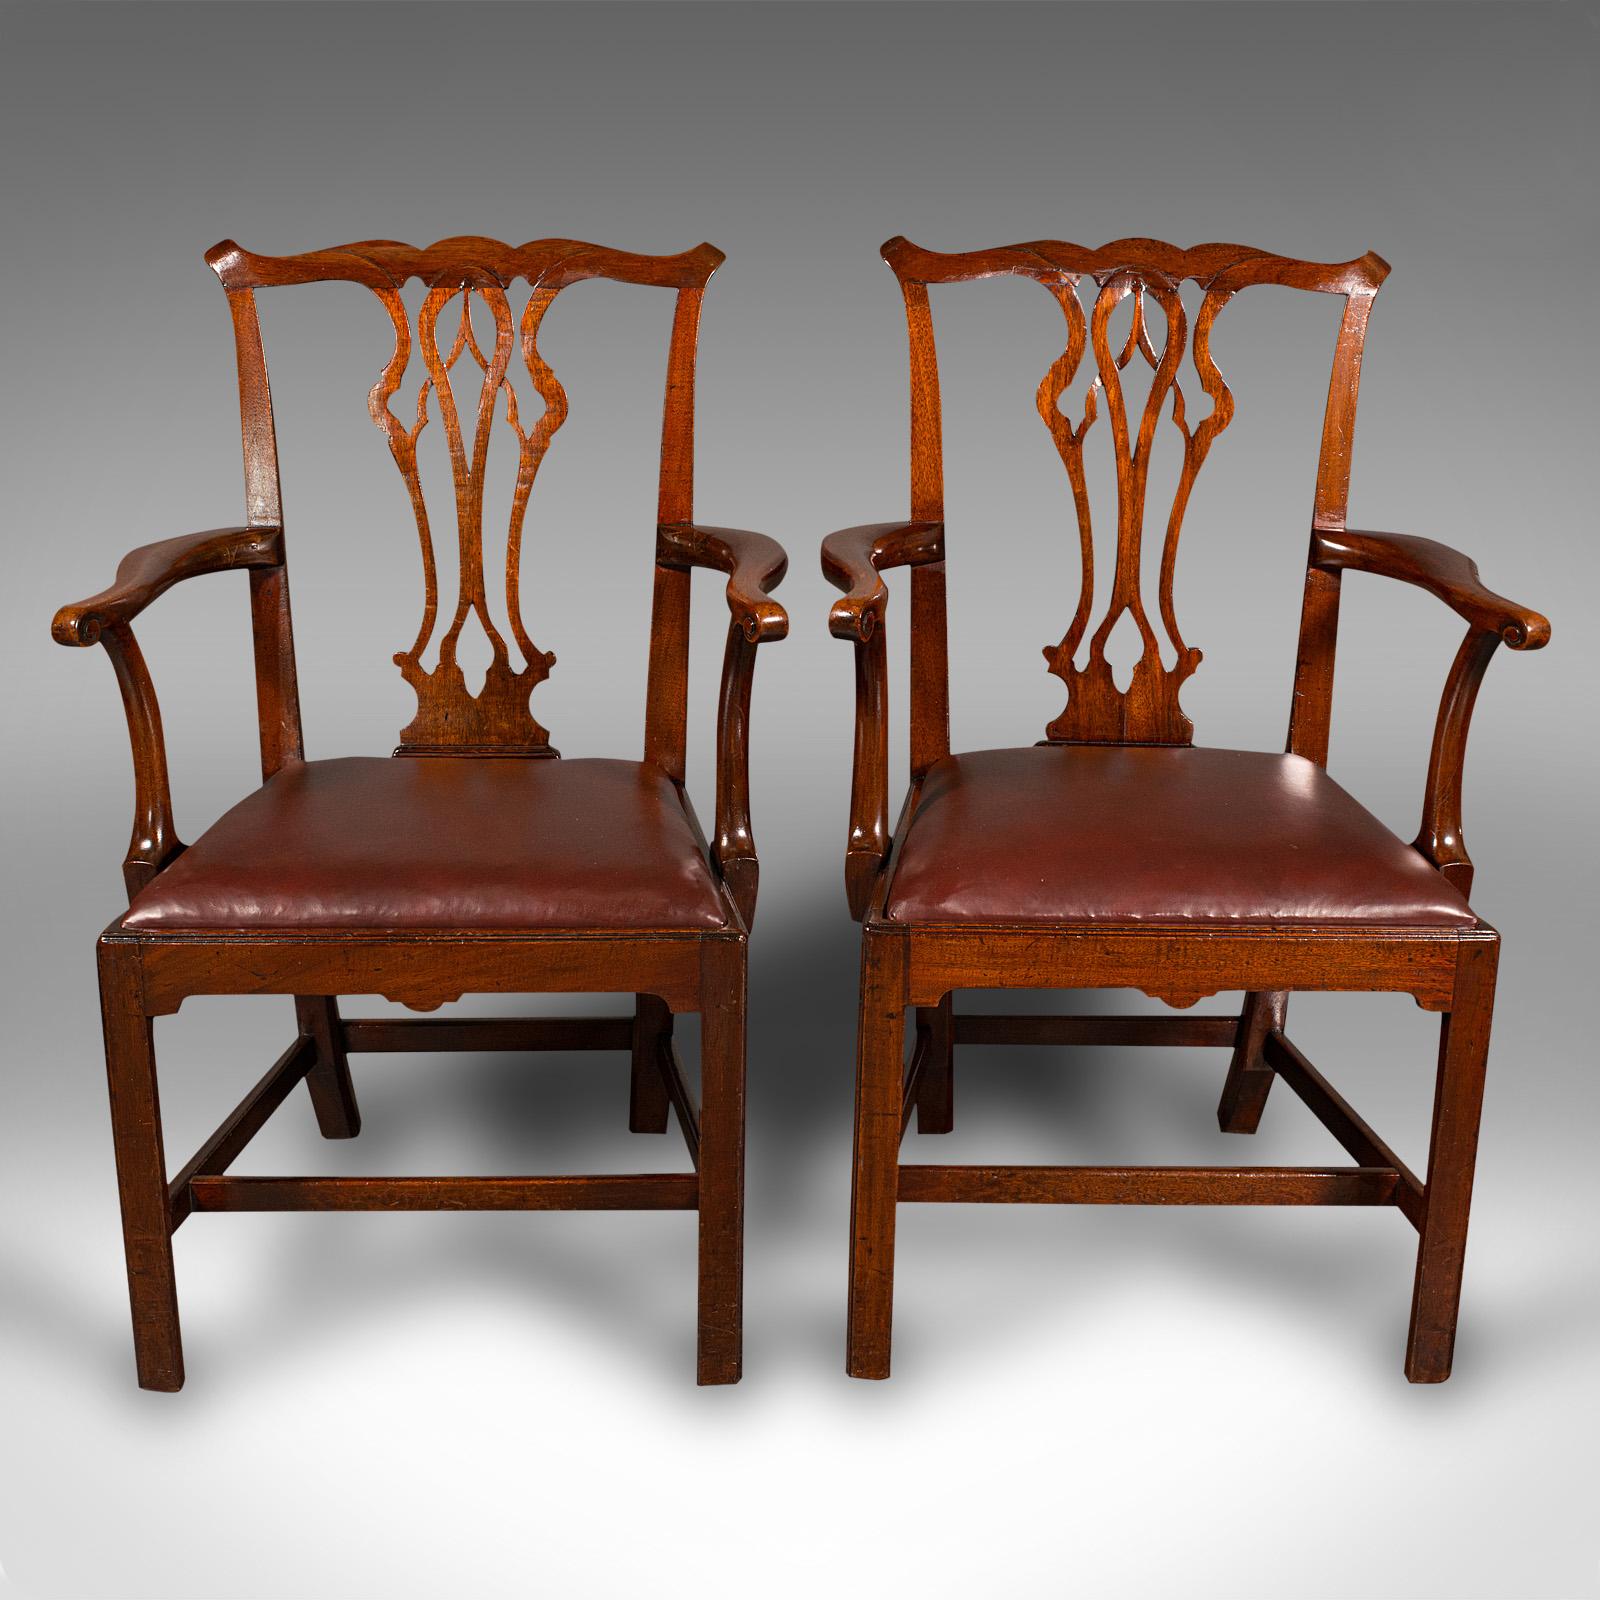 This is a pair of antique carver chairs. An English, mahogany and leather elbow seat in the Chippendale manner, dating to the Georgian period, circa 1800.

Superb Chippendale taste and fine craftsmanship
Displaying a desirable aged patina and in